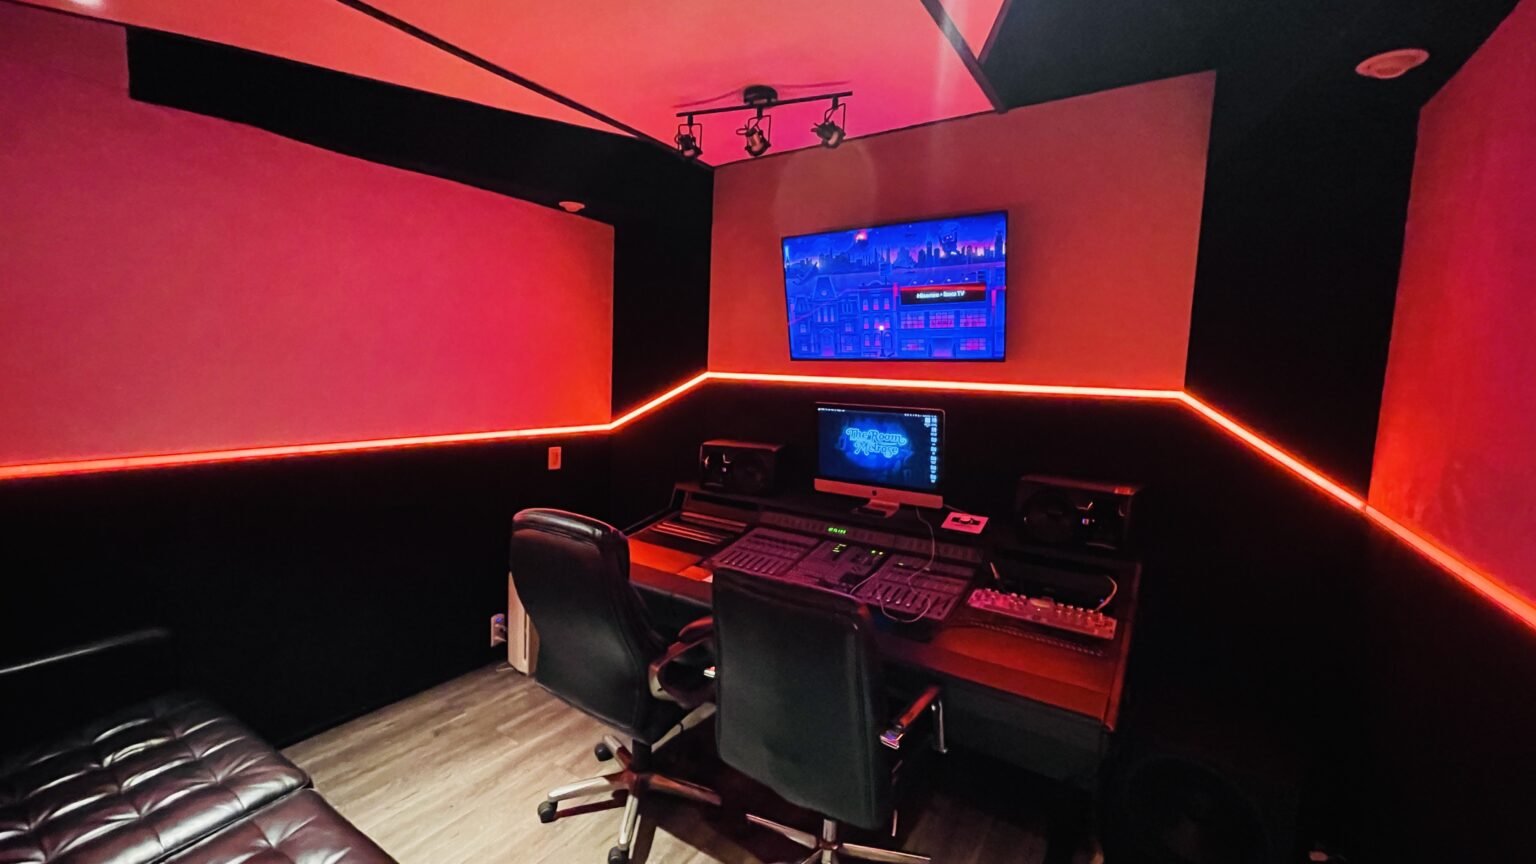 Recording Studio with large monitor